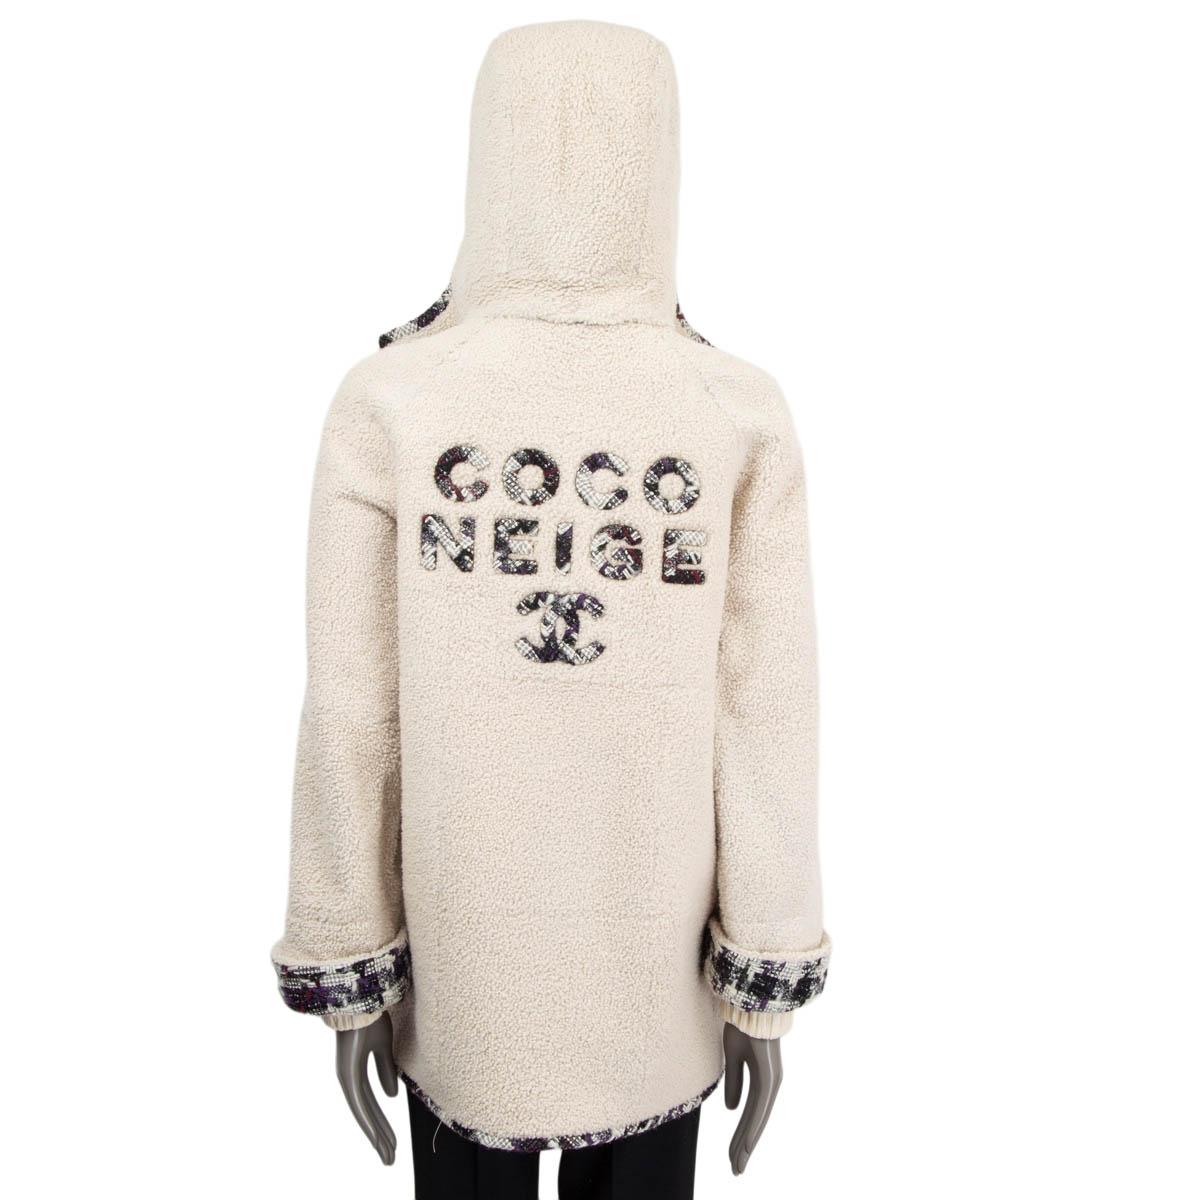 Beige CHANEL off-white 2019 COCO NEIGE SHEARLING DUFFLE Coat Jacket 38 S For Sale